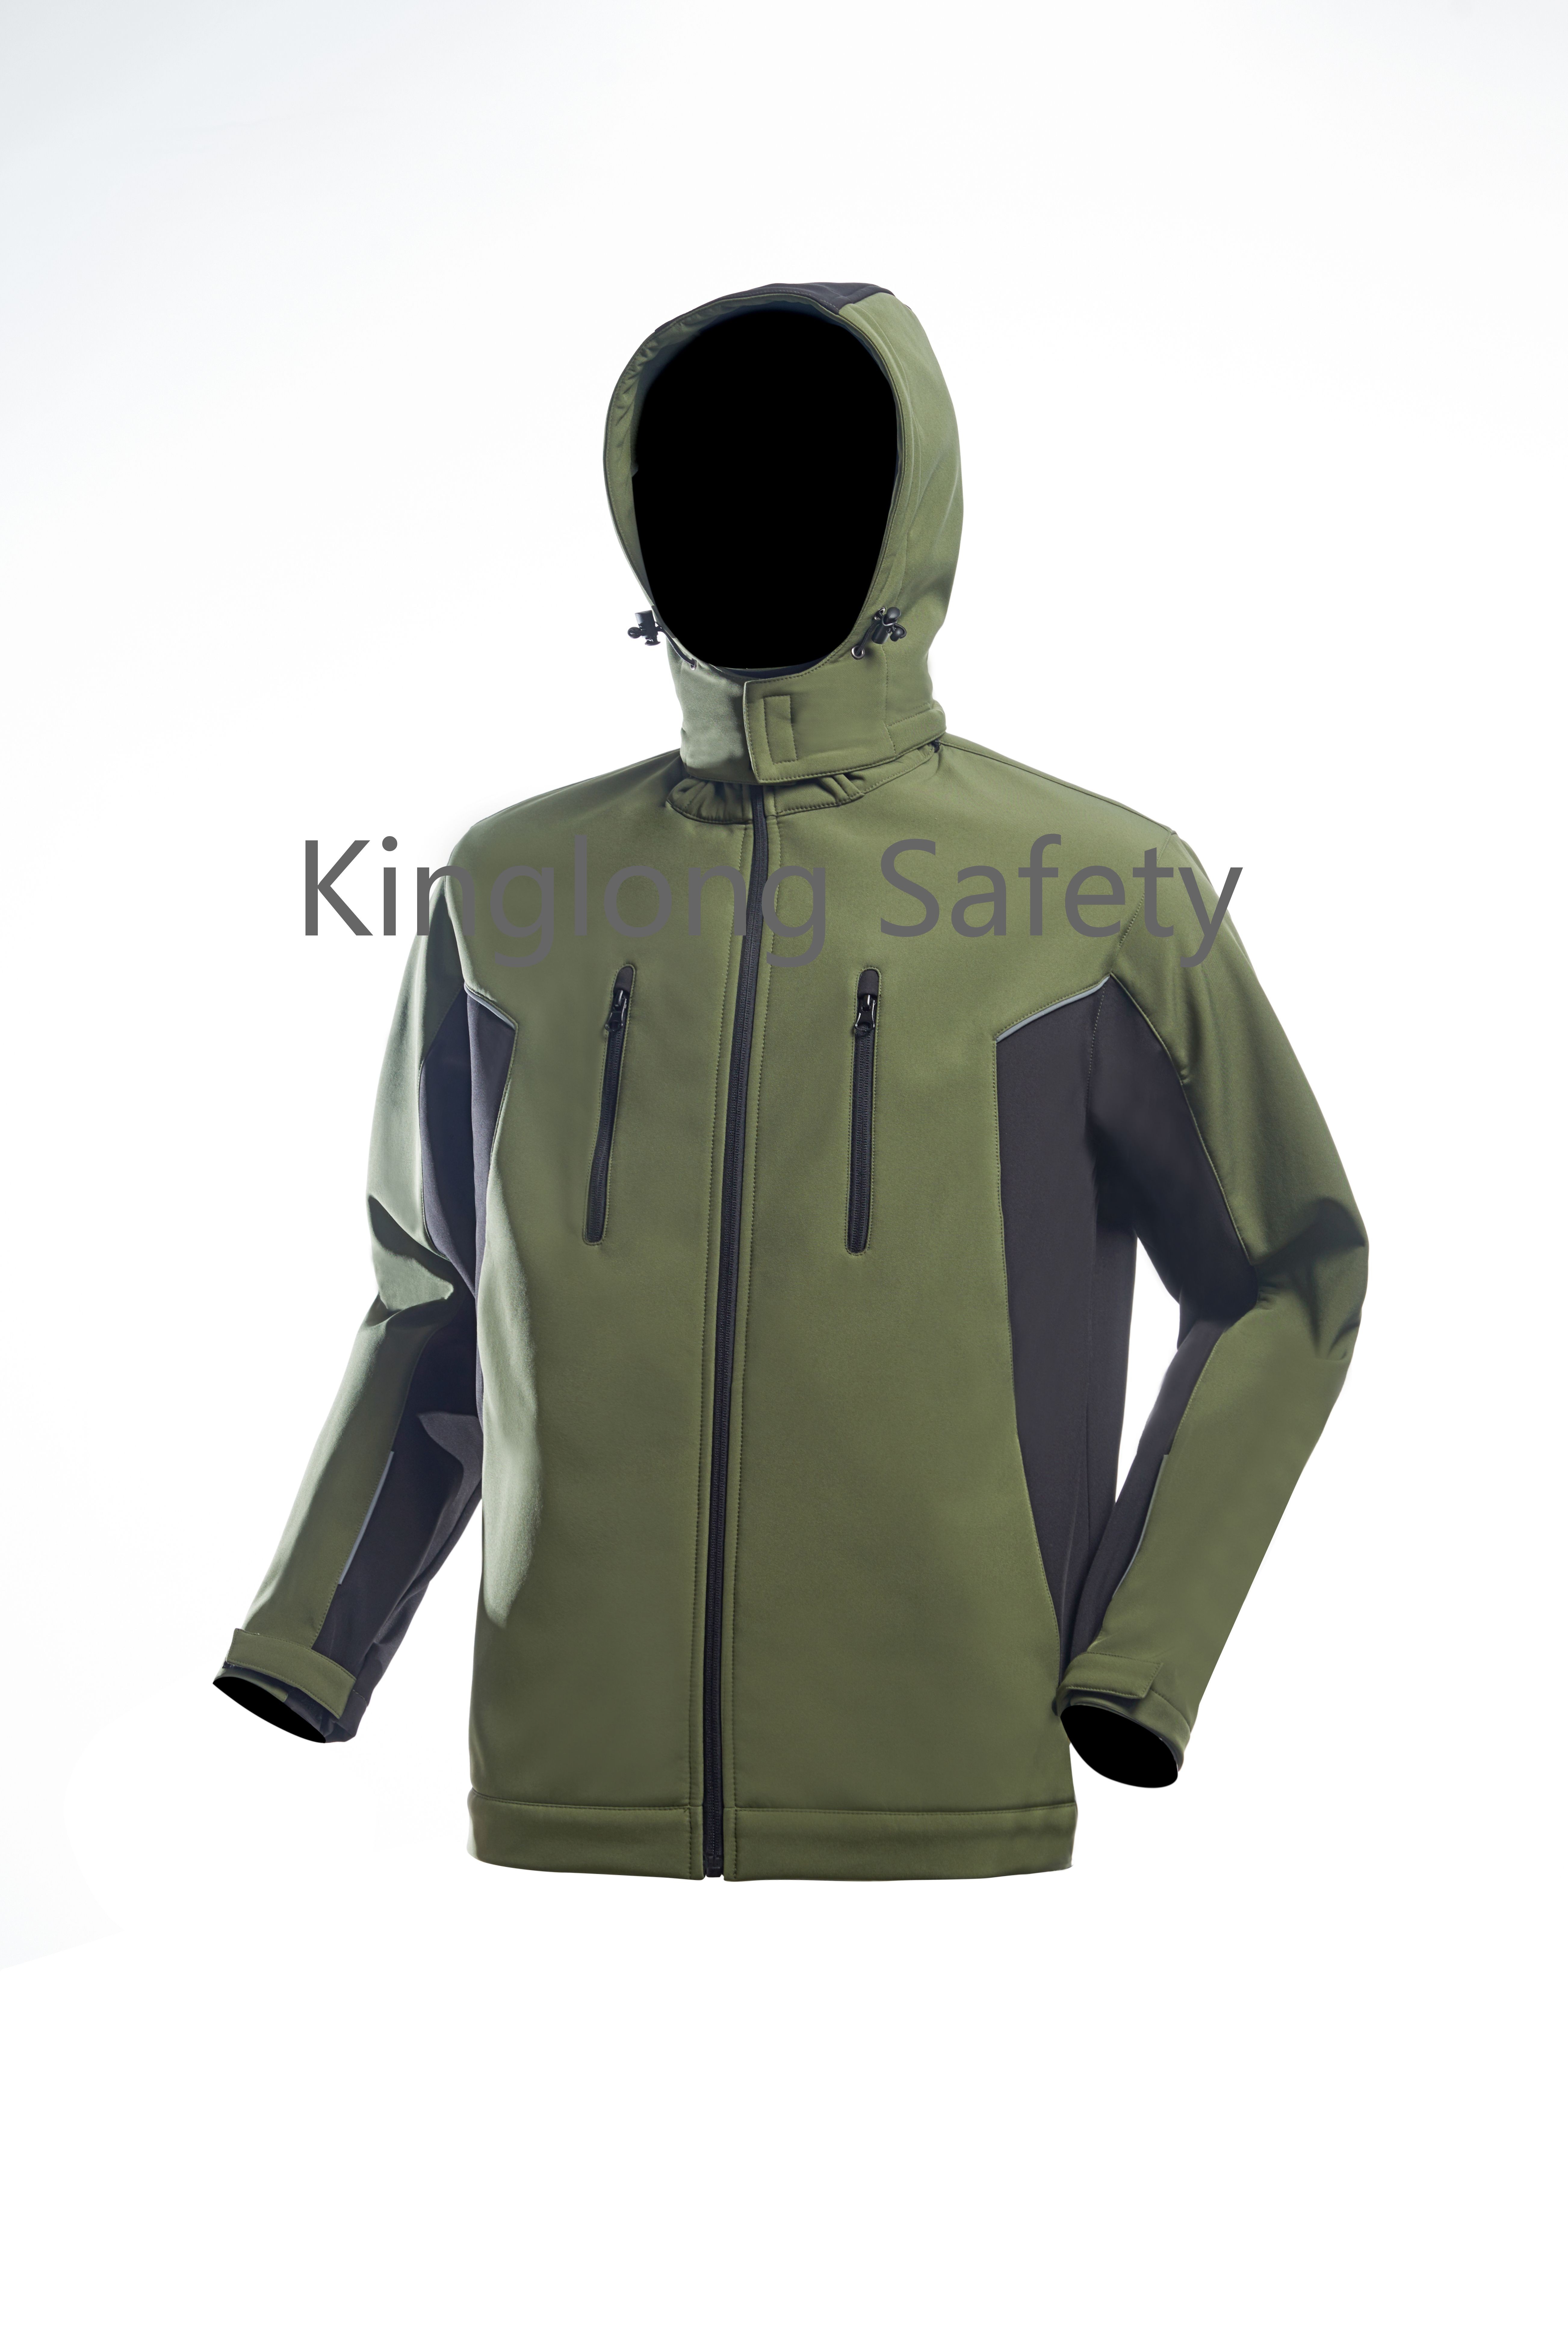 China Wholesale mens fashion work jackets mens outdoor softshell jackets jogging hoodies manufacturer